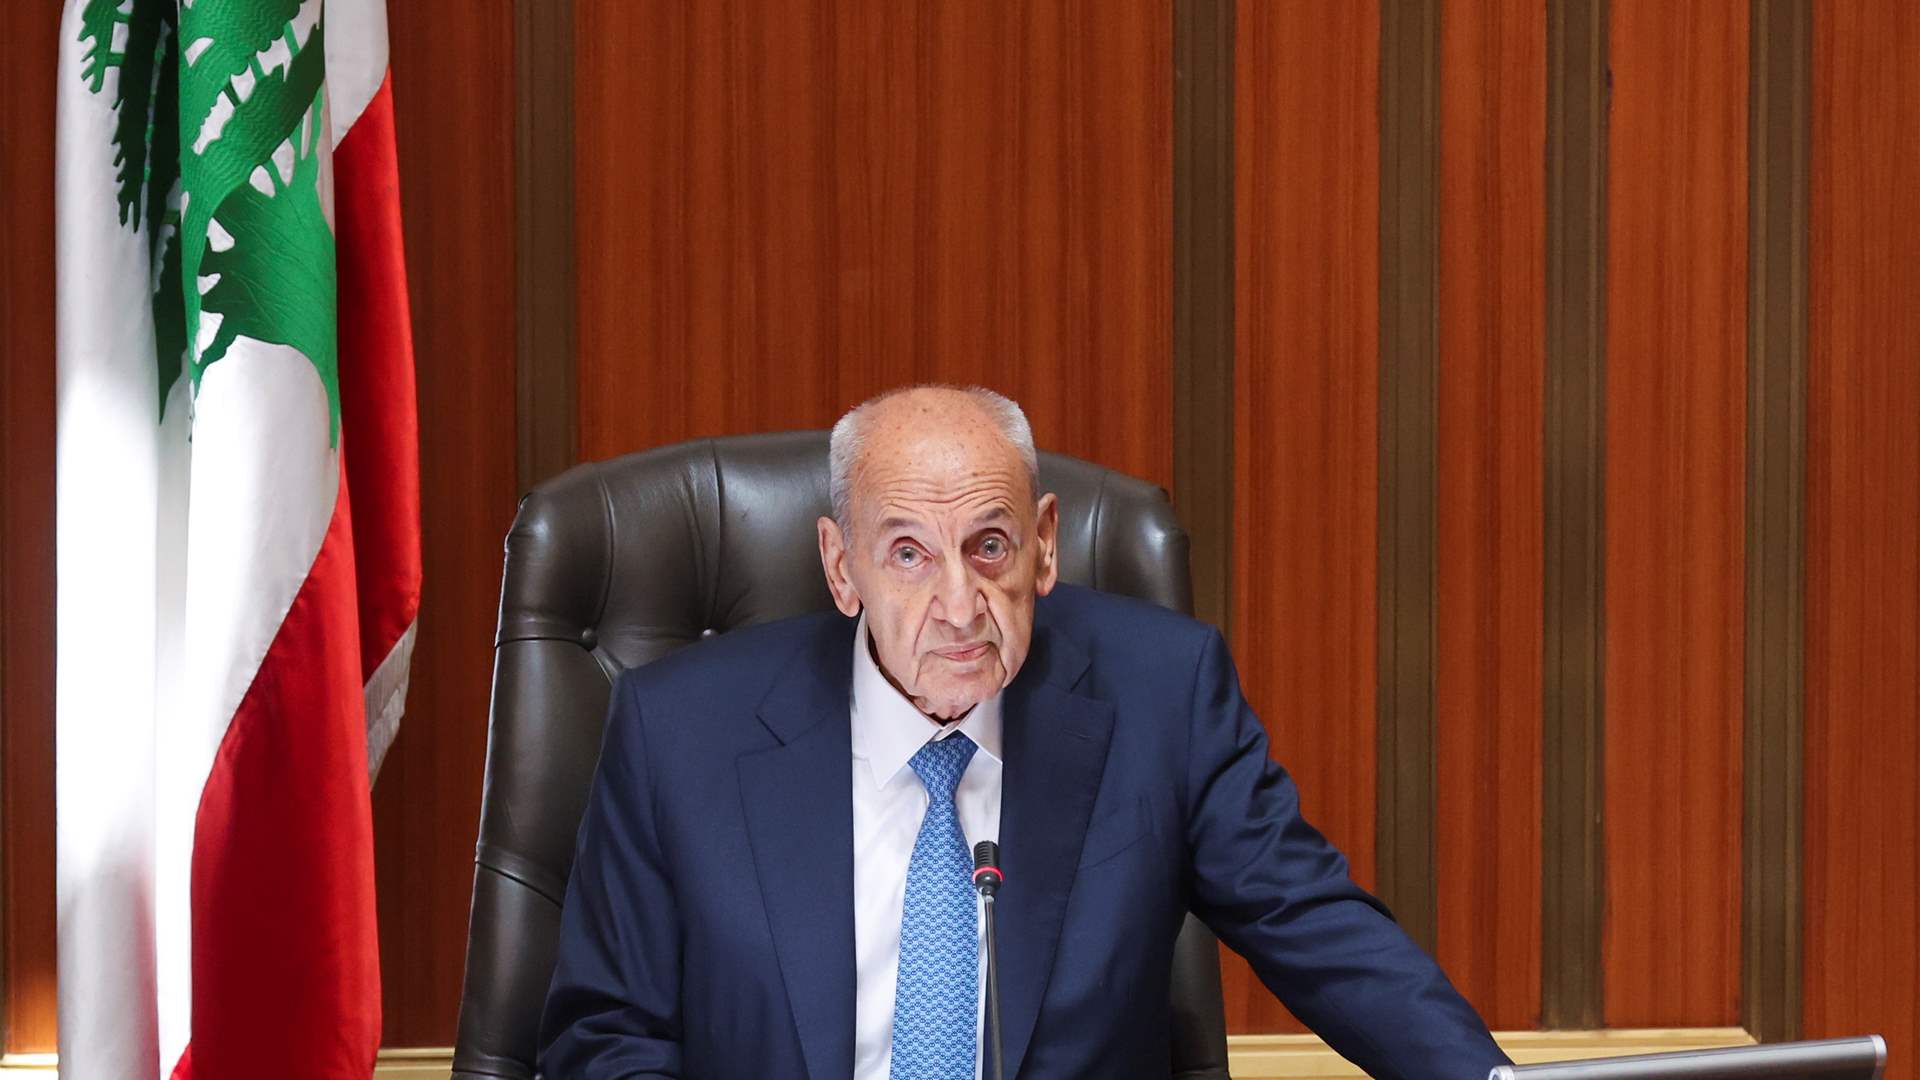 Mutual vetoes remain the main obstacle in Lebanese presidential elections: Berri